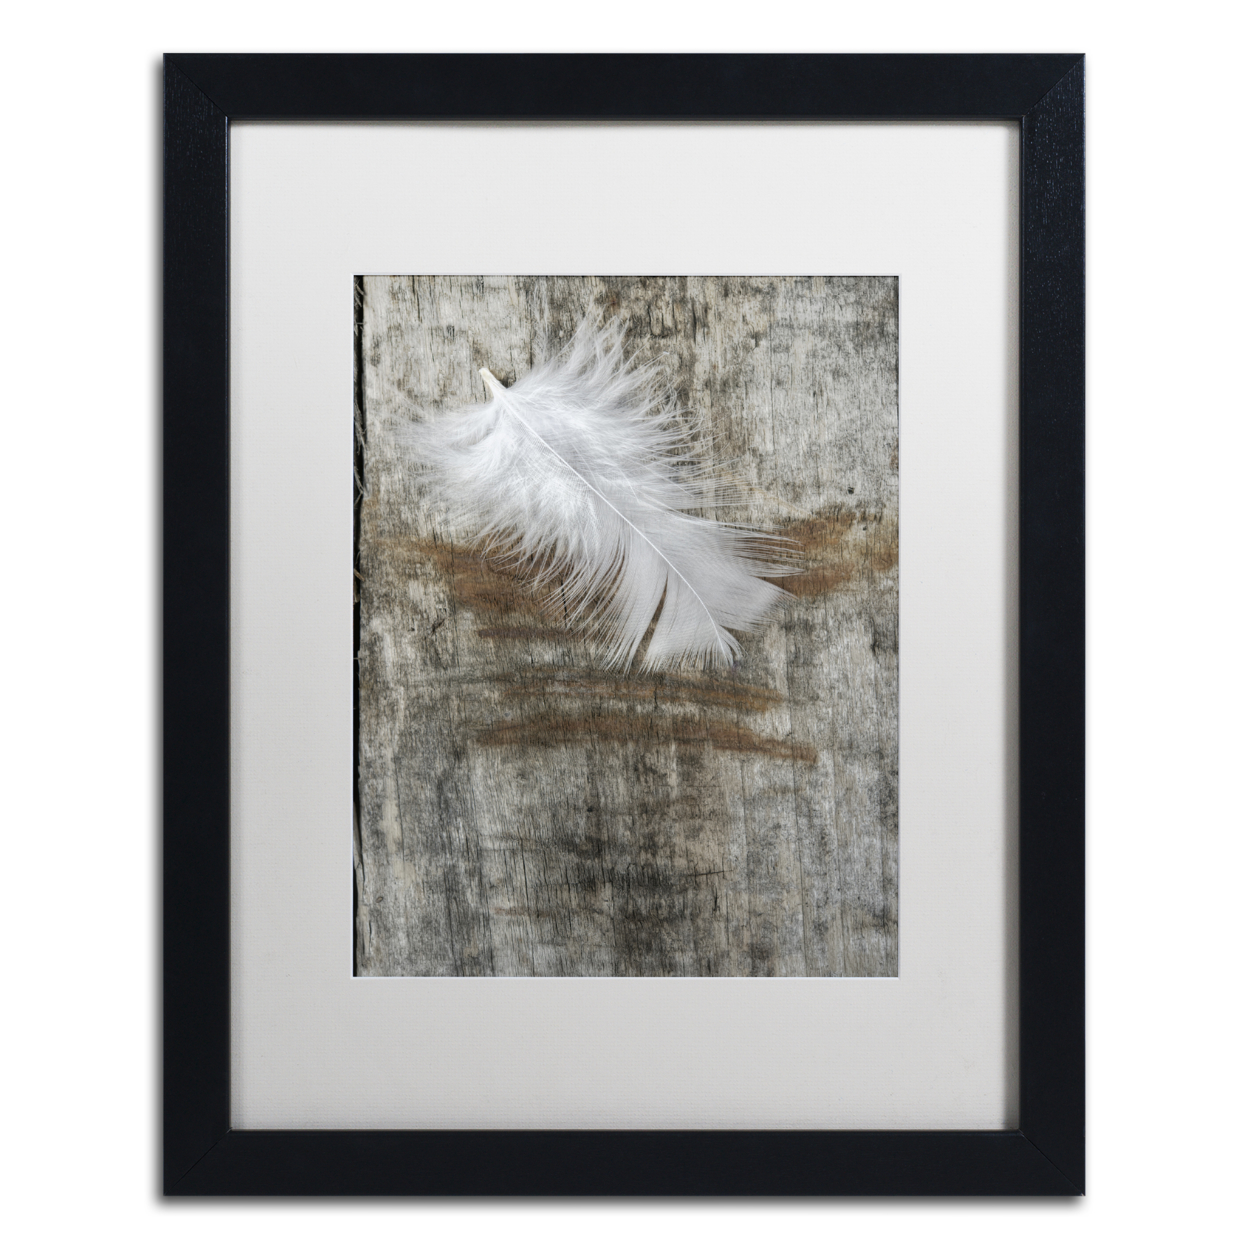 Cora Niele 'White Feather On Wood' Black Wooden Framed Art 18 X 22 Inches